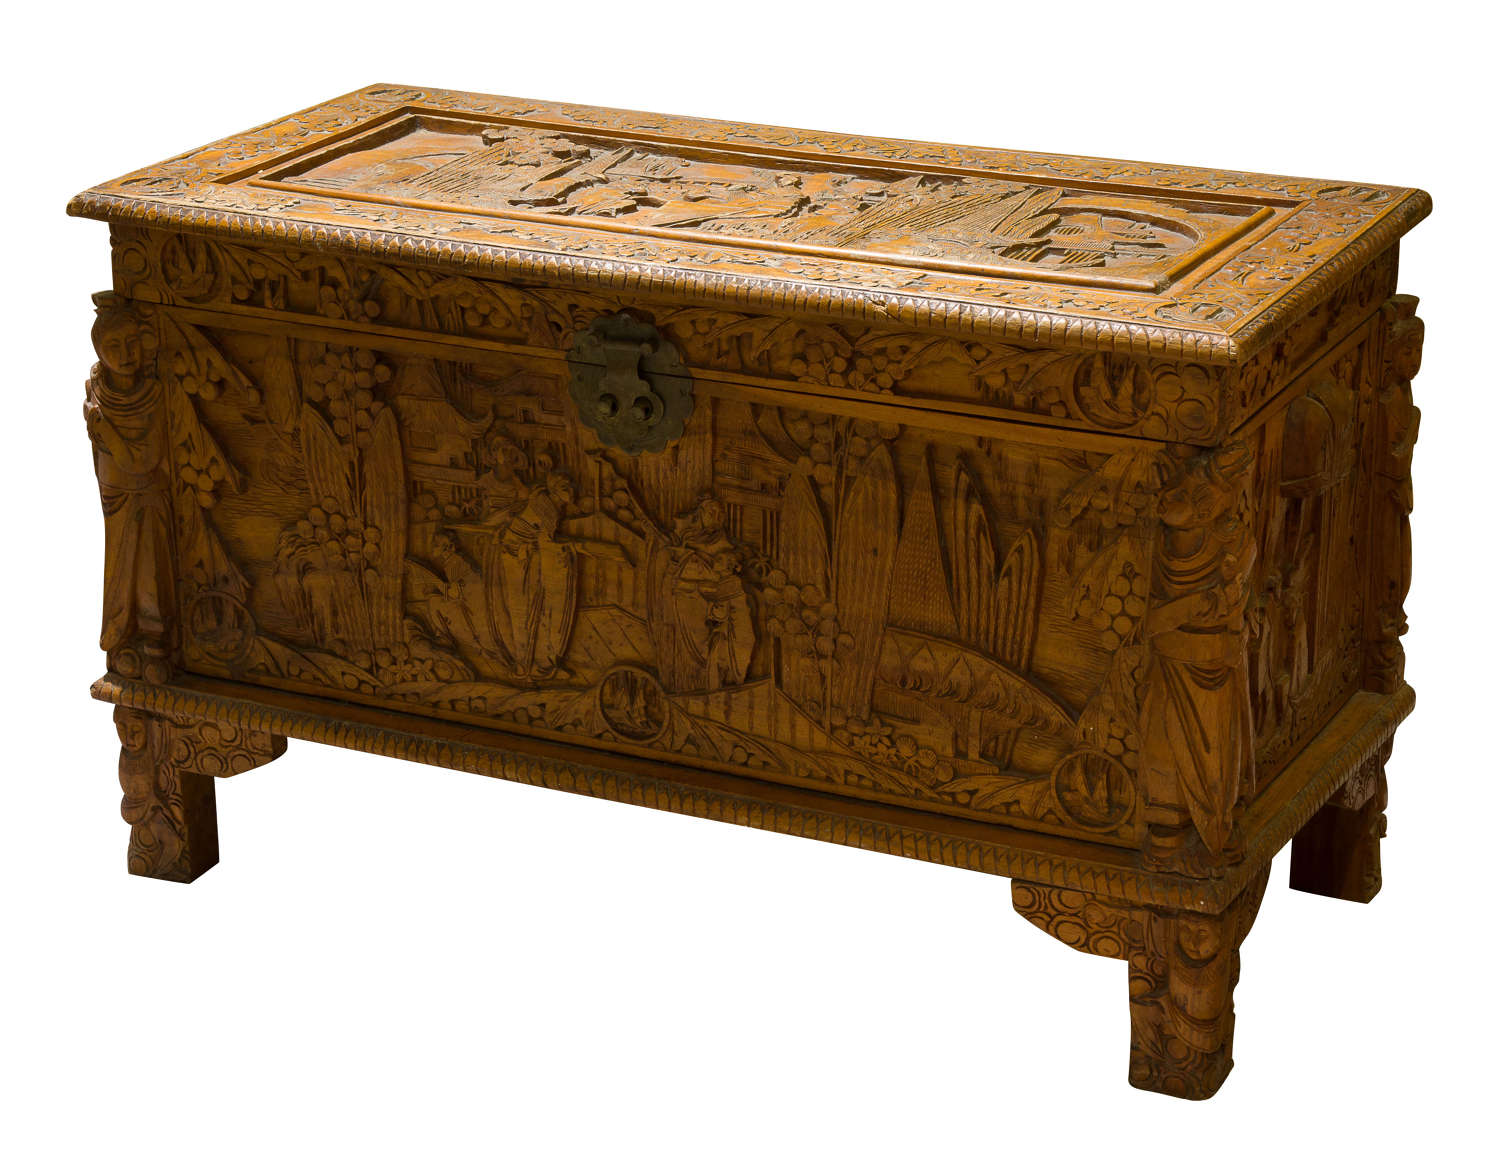 An early 20thCentury Chinese style carved Camphorwood chest